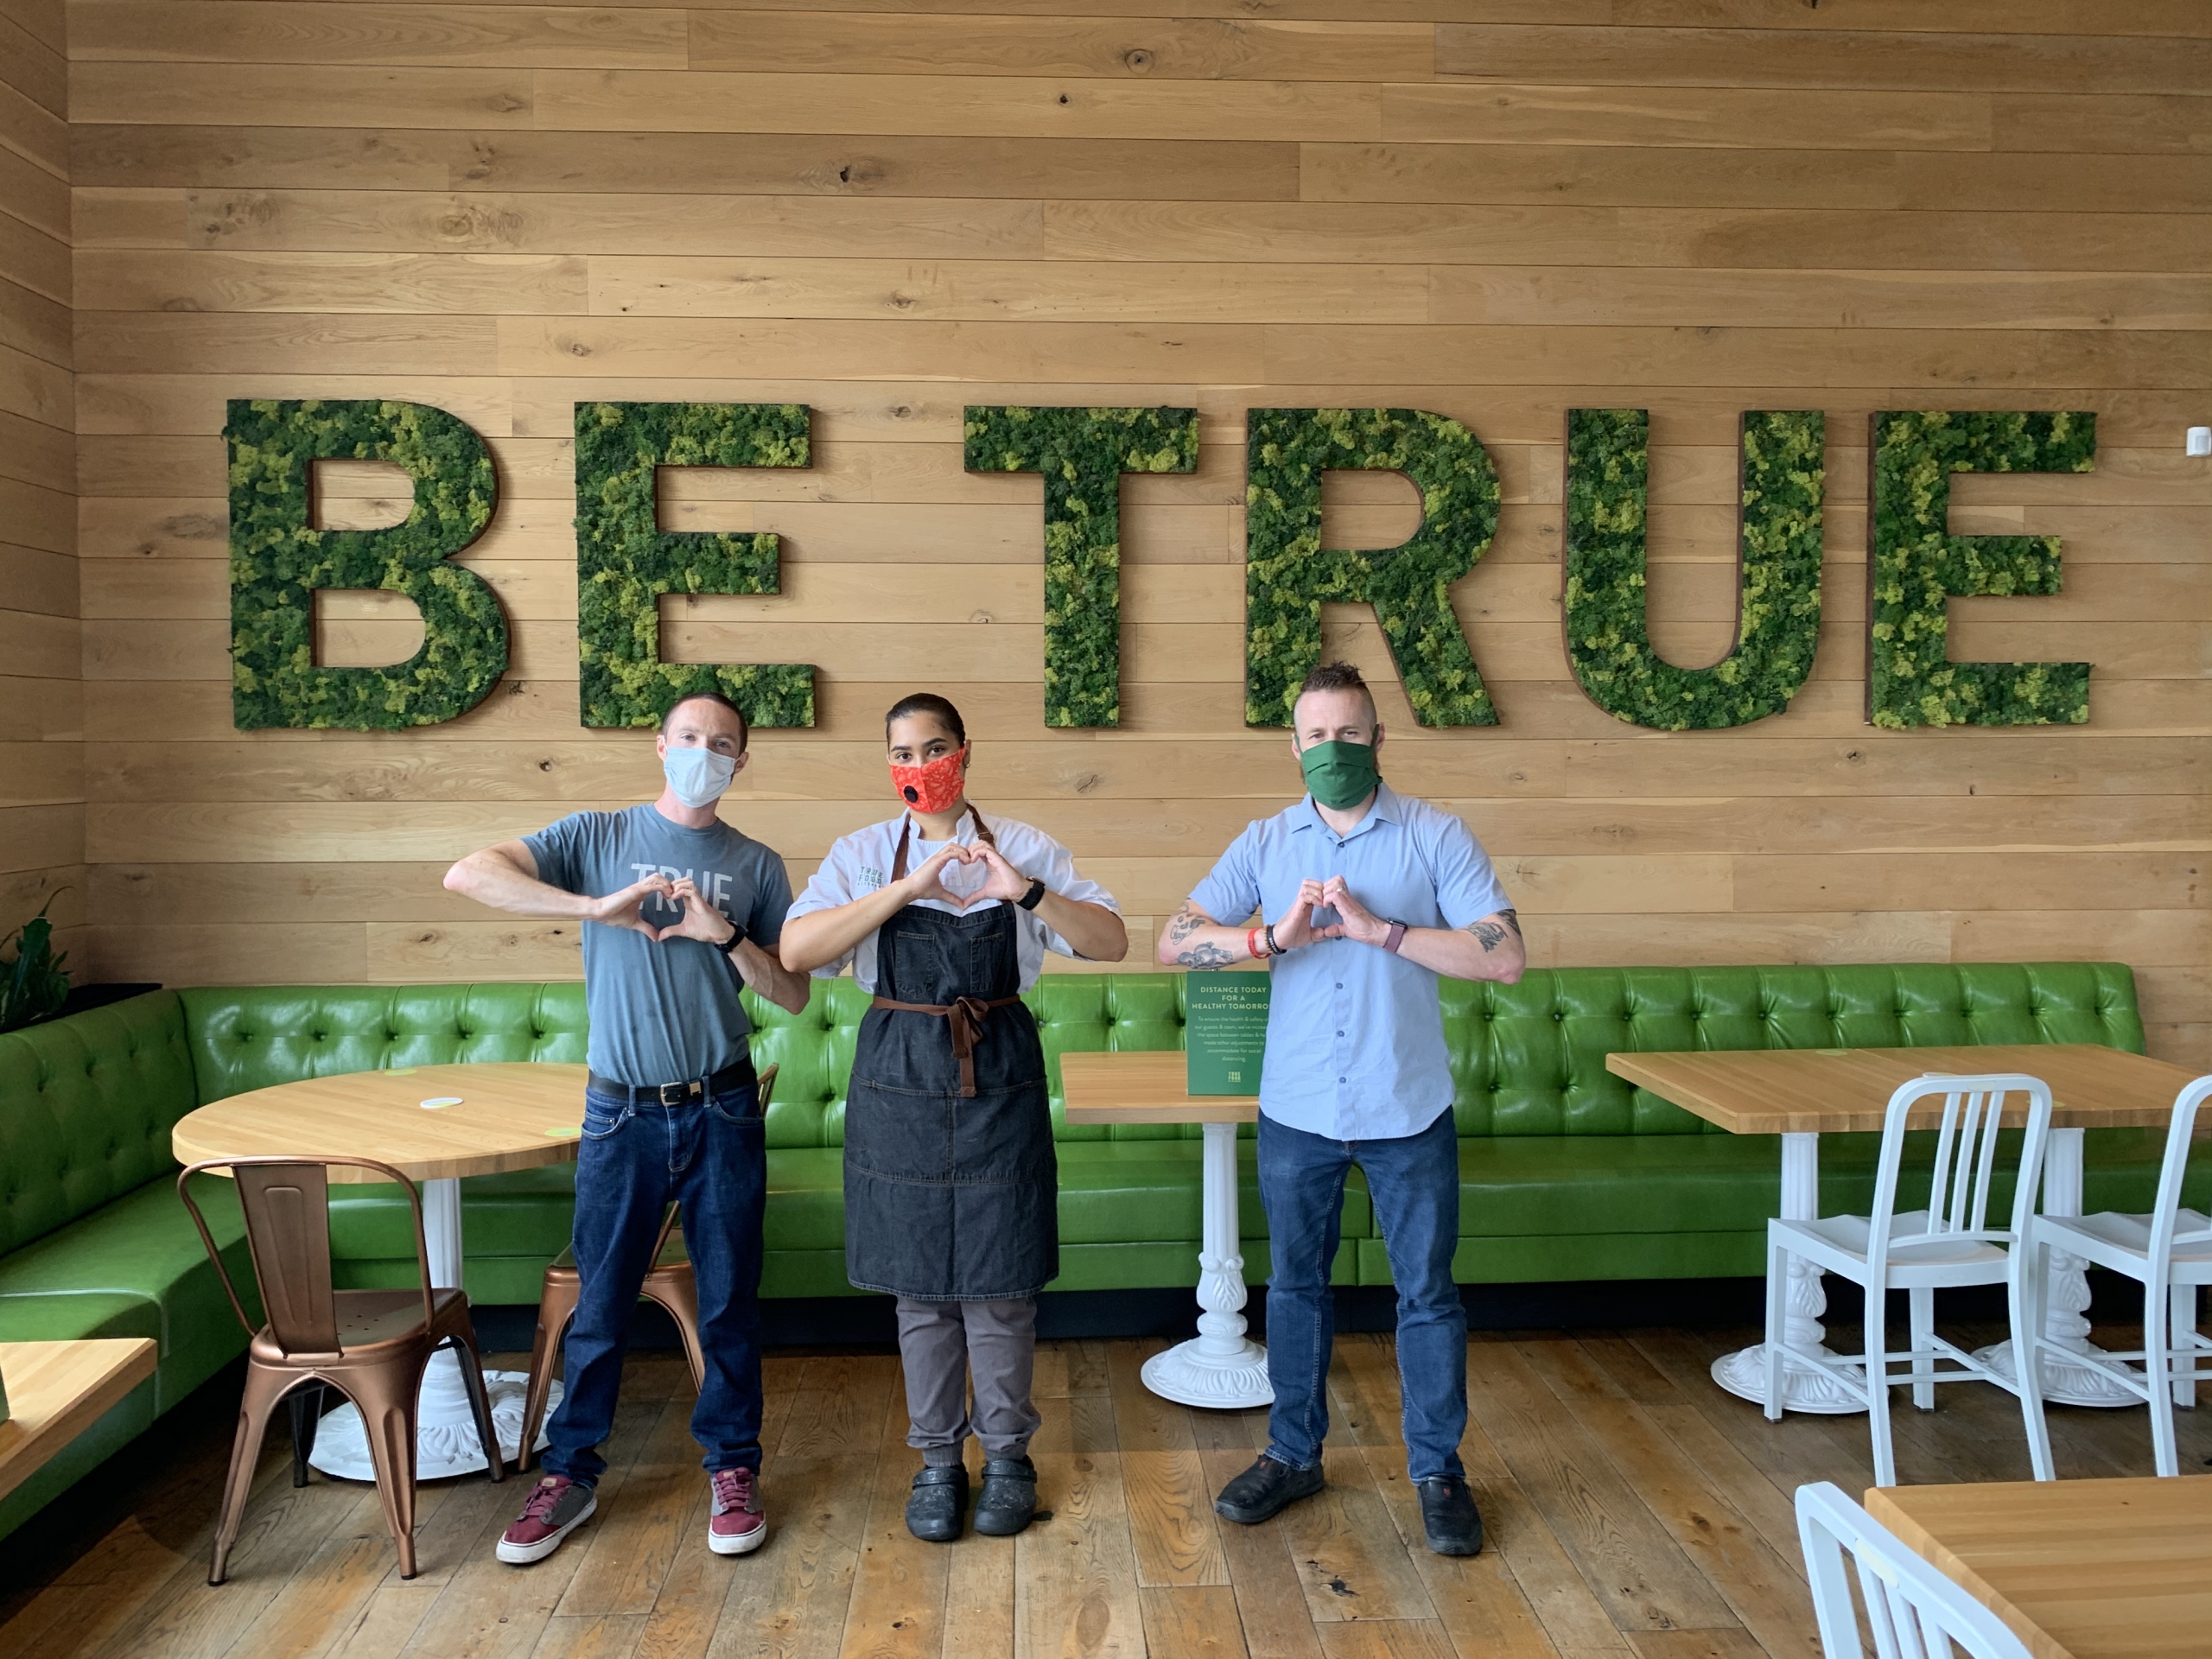 three people in front of a large wall that says "BE TRUE" on it, making heart symbols with their hands